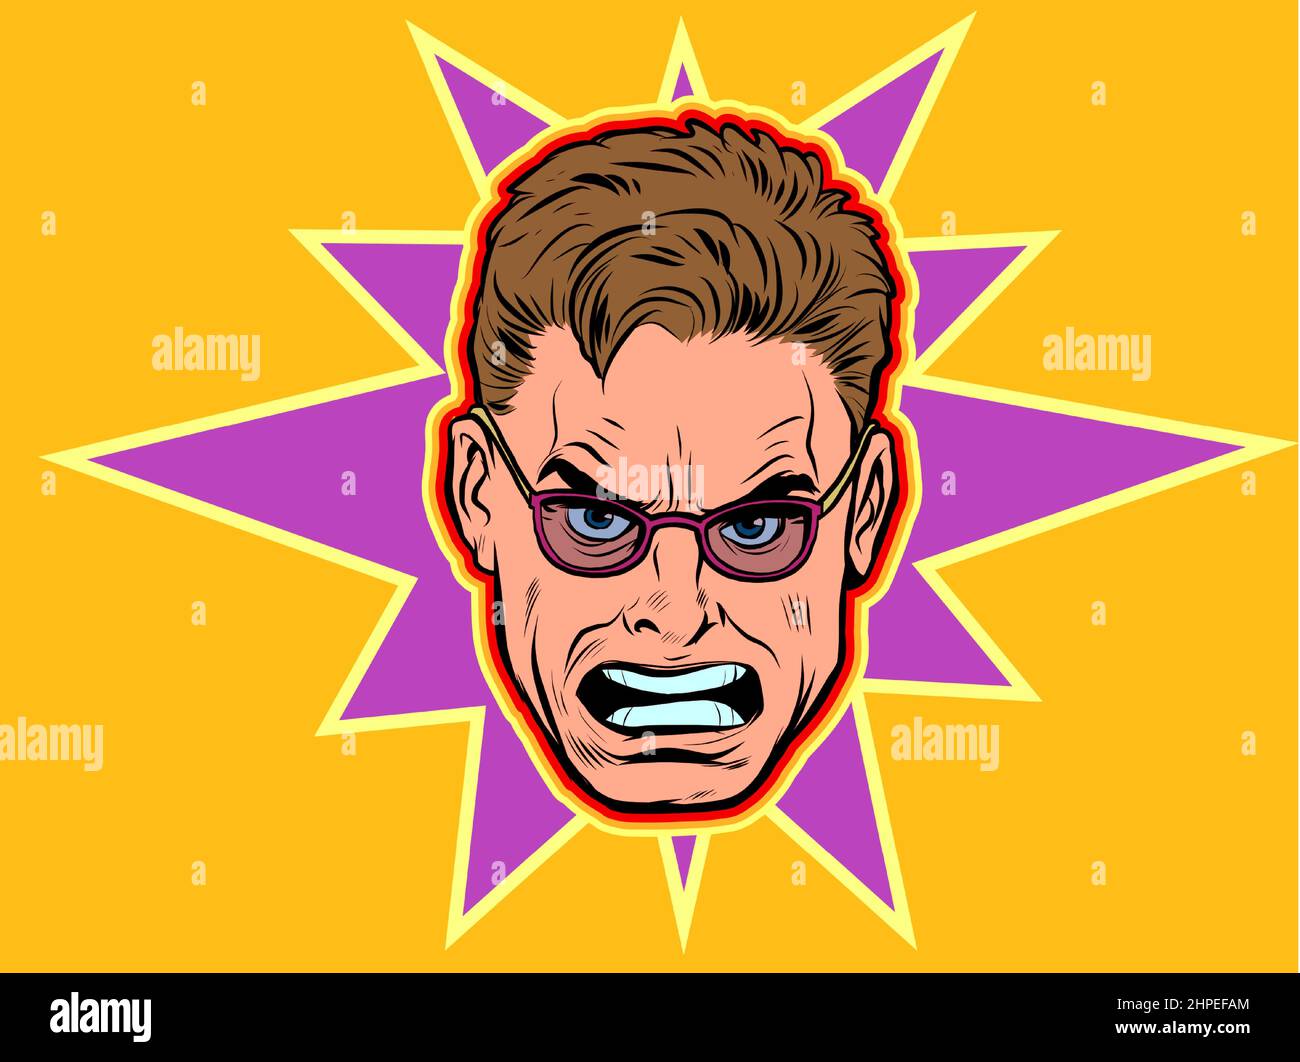 Angry male face, human emotions. Comic style illustration Stock Vector